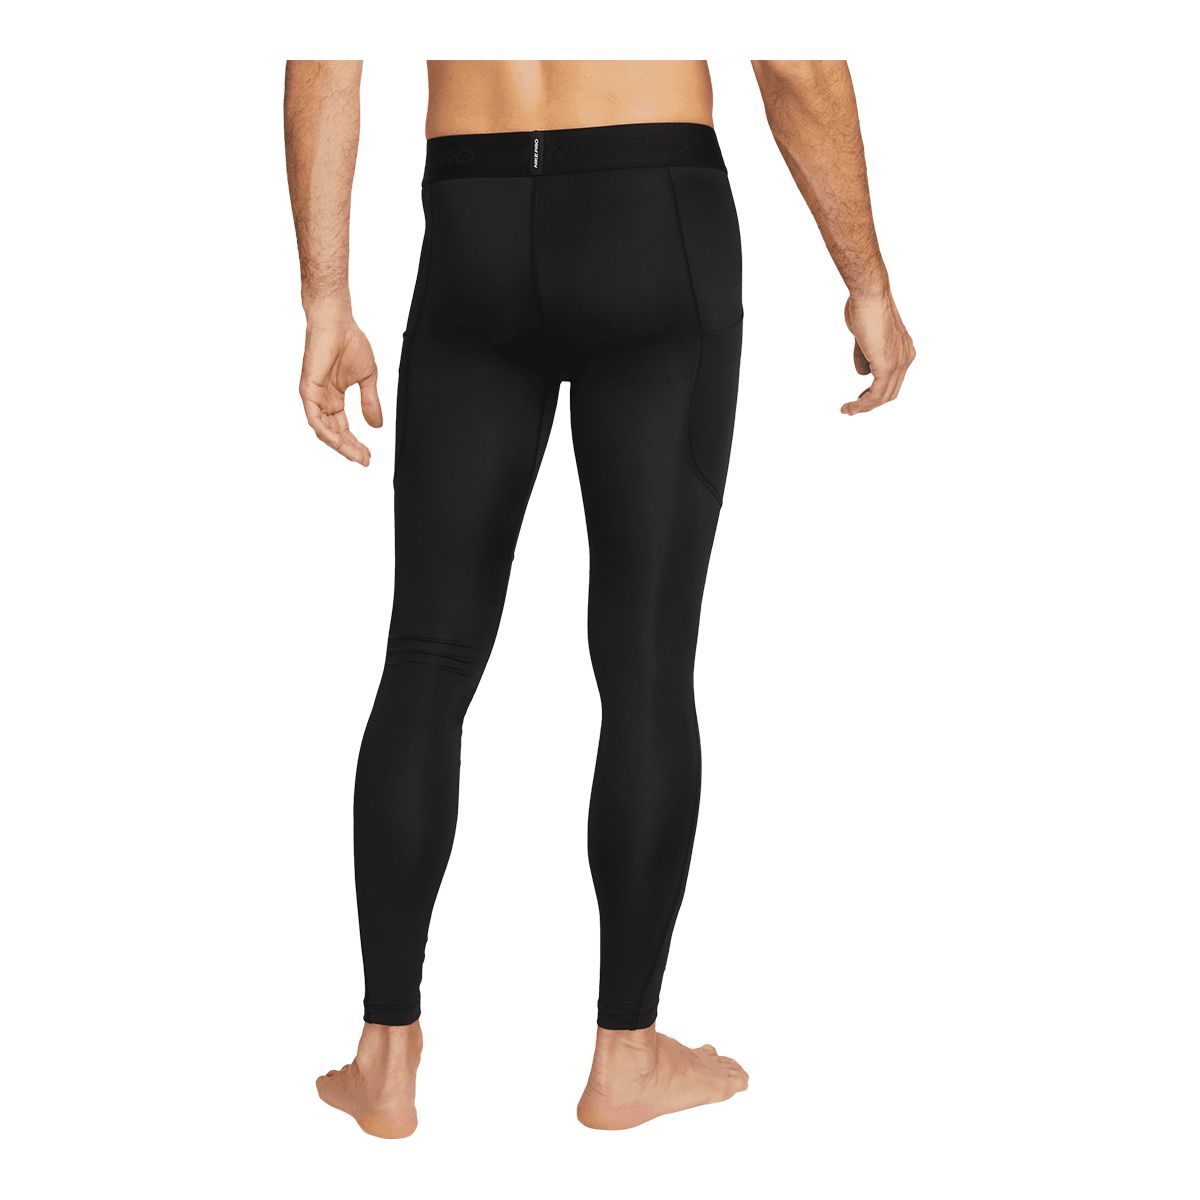 Running Tights Men Sports Leggings Sportswear Long Trousers Yoga Pants  Winter Fitness Compression Quick-drying Pants